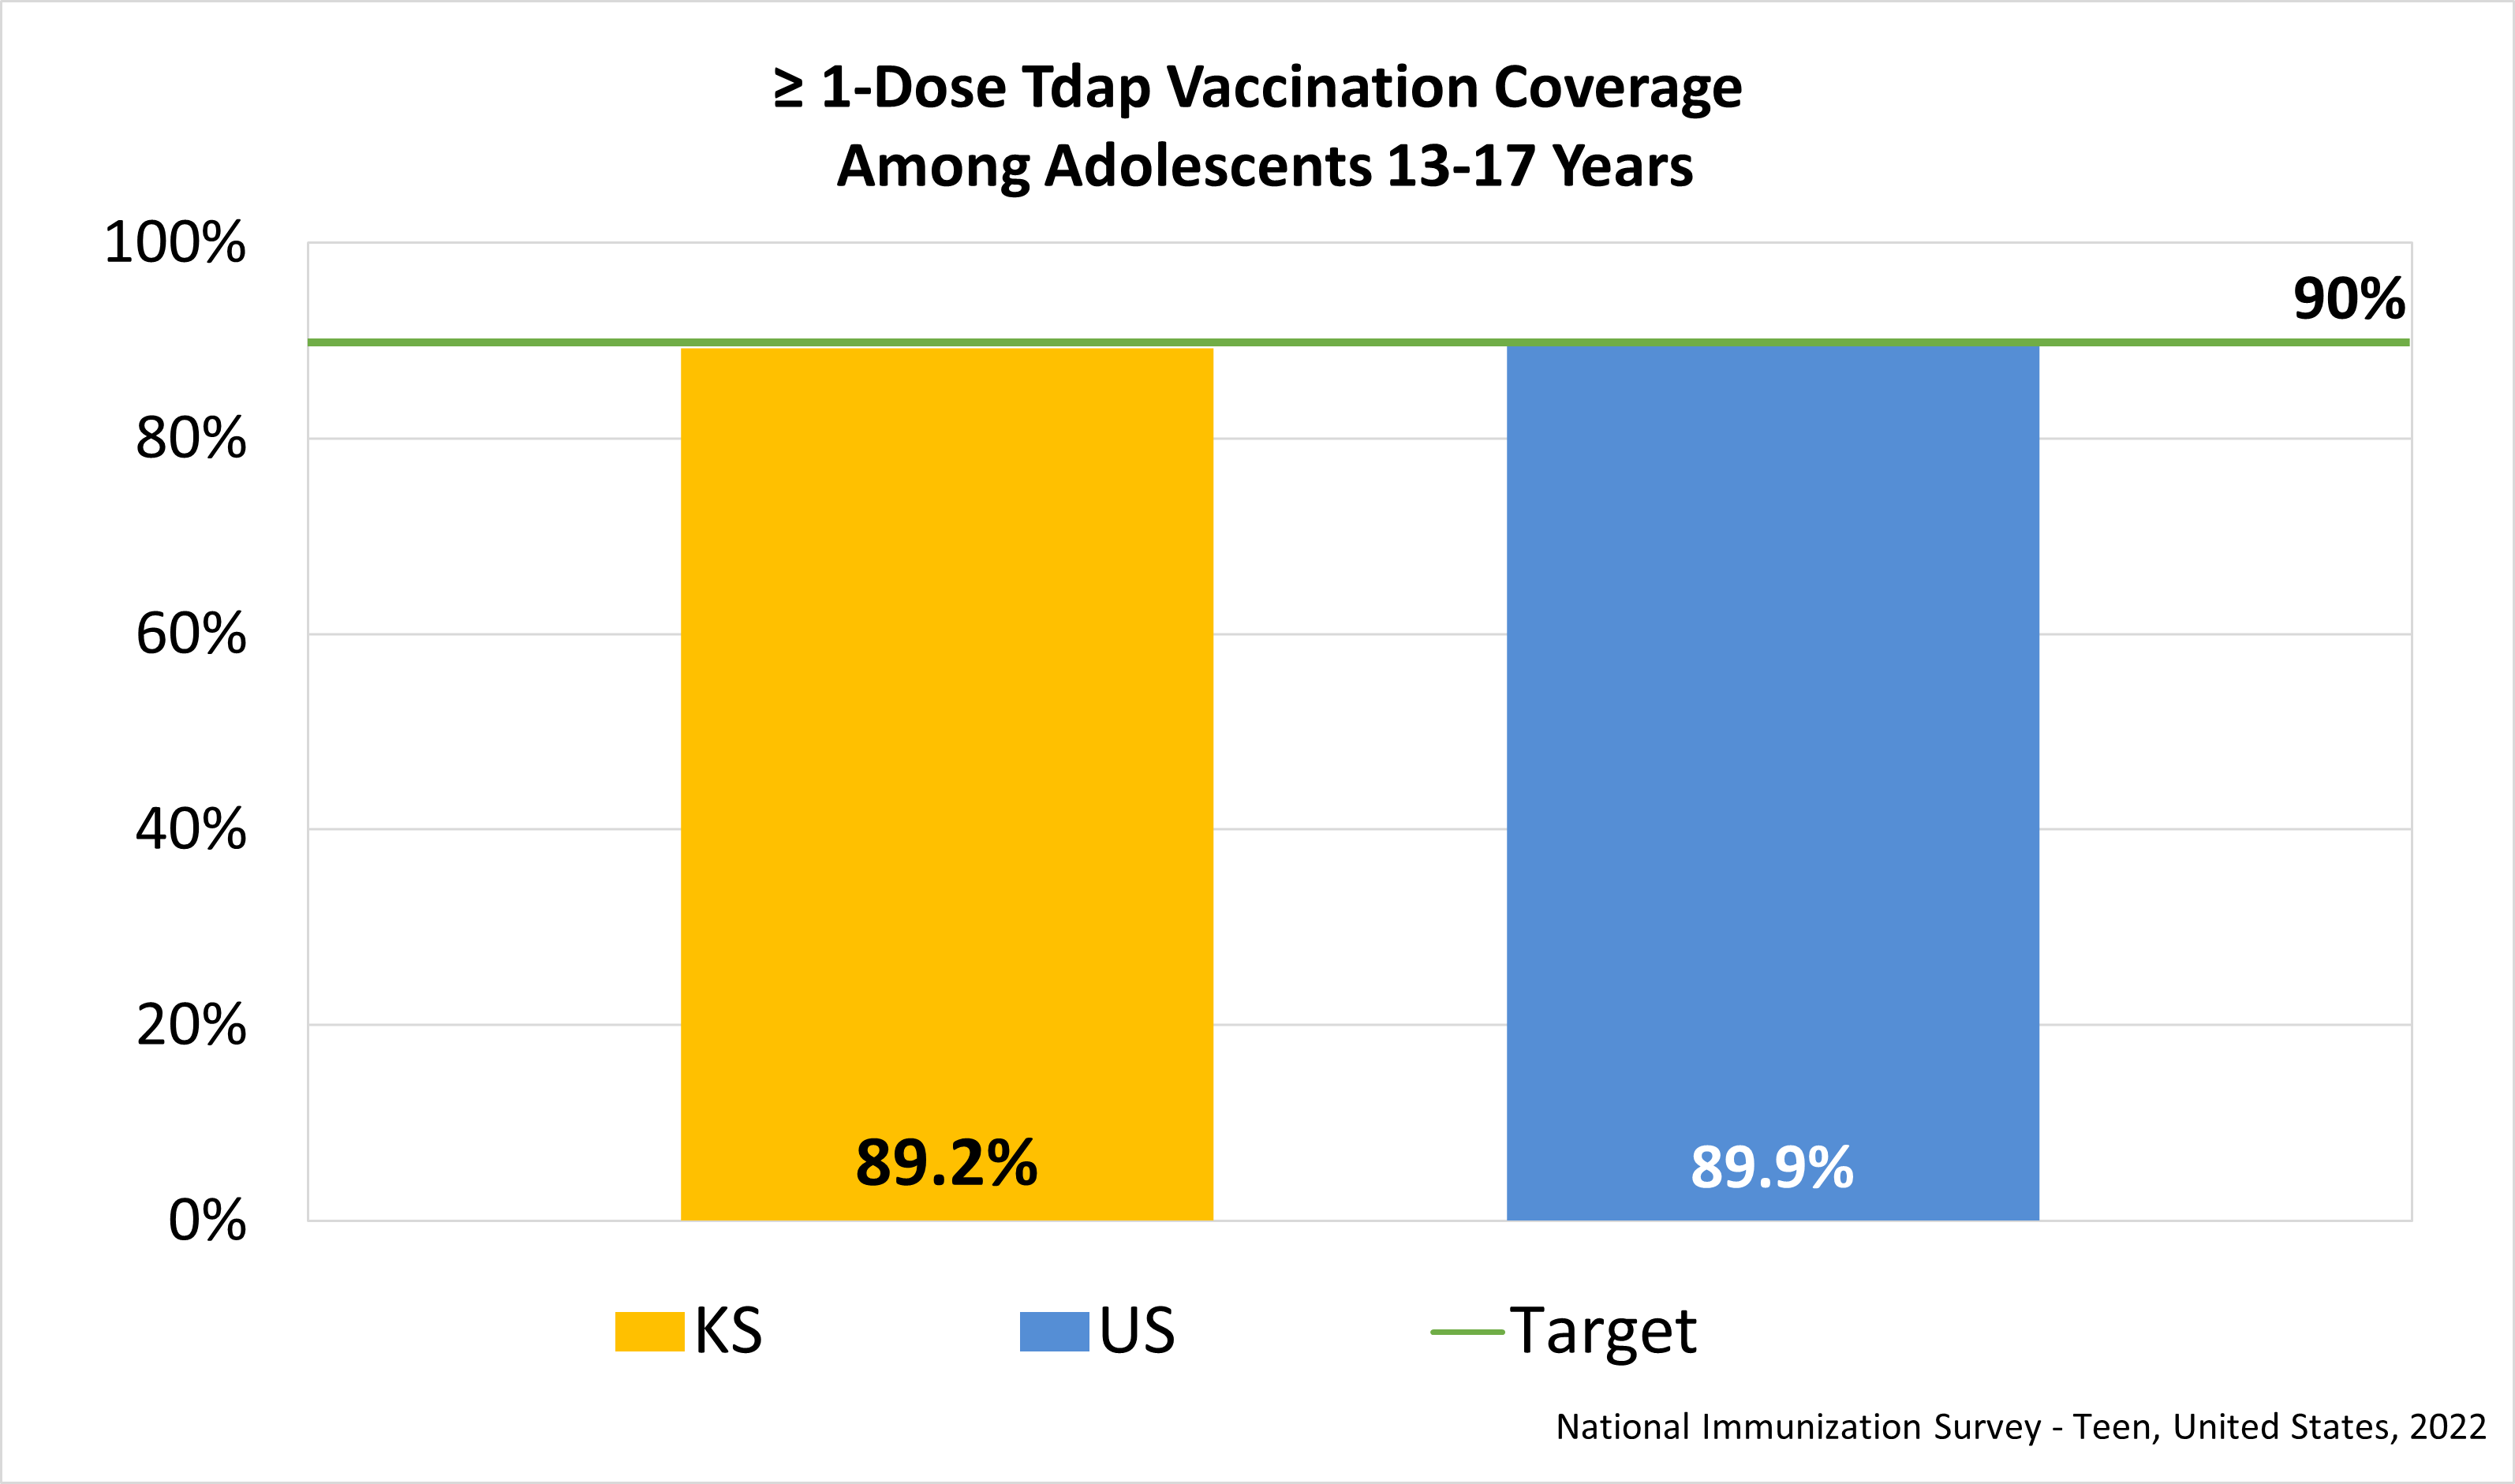 Estimated Tdap Vaccination Coverage Among Adolescents 13-17 Years